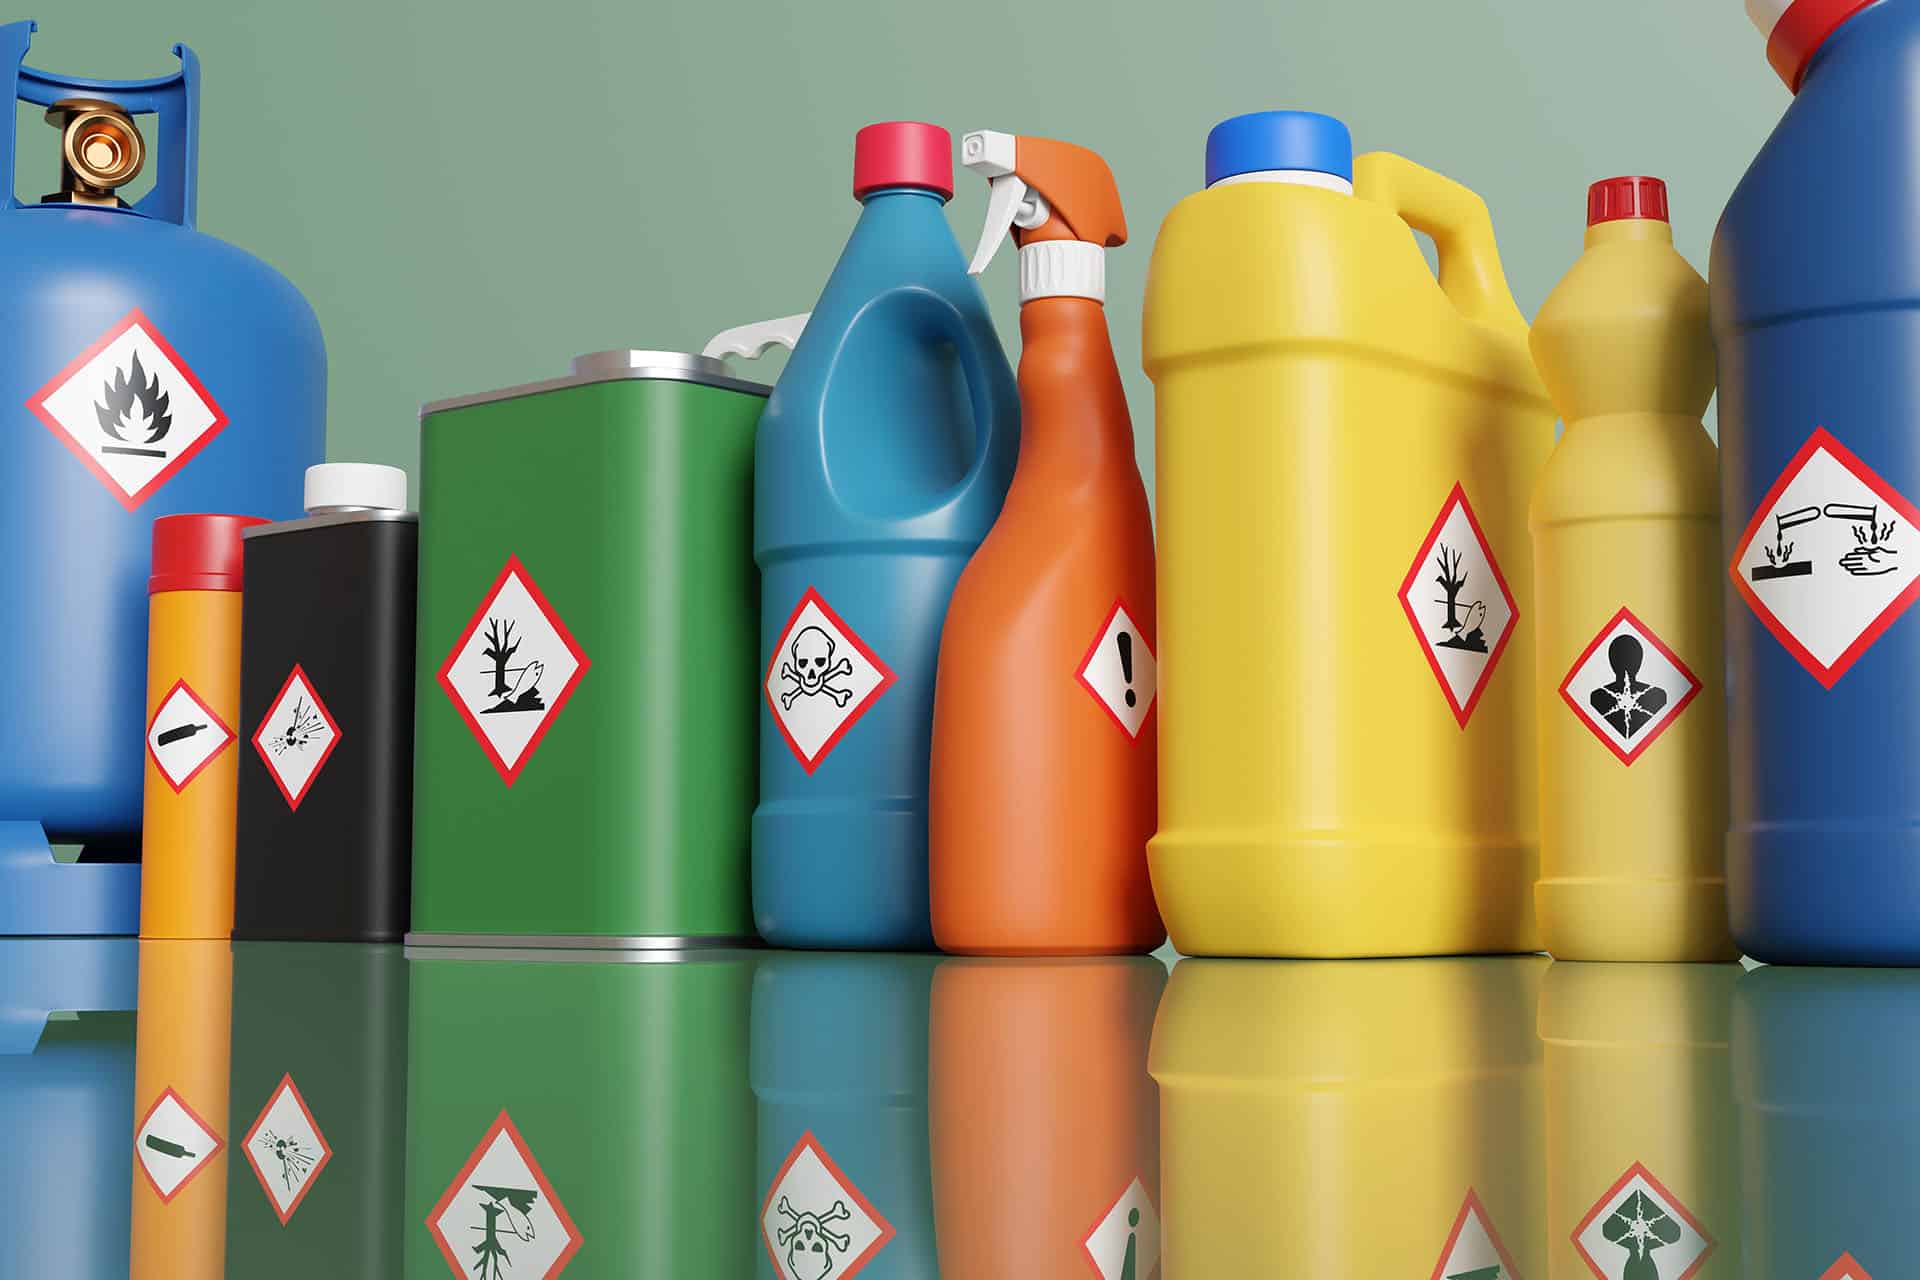 Plastic bottles and metallic tins having with different hazardous warning labels.